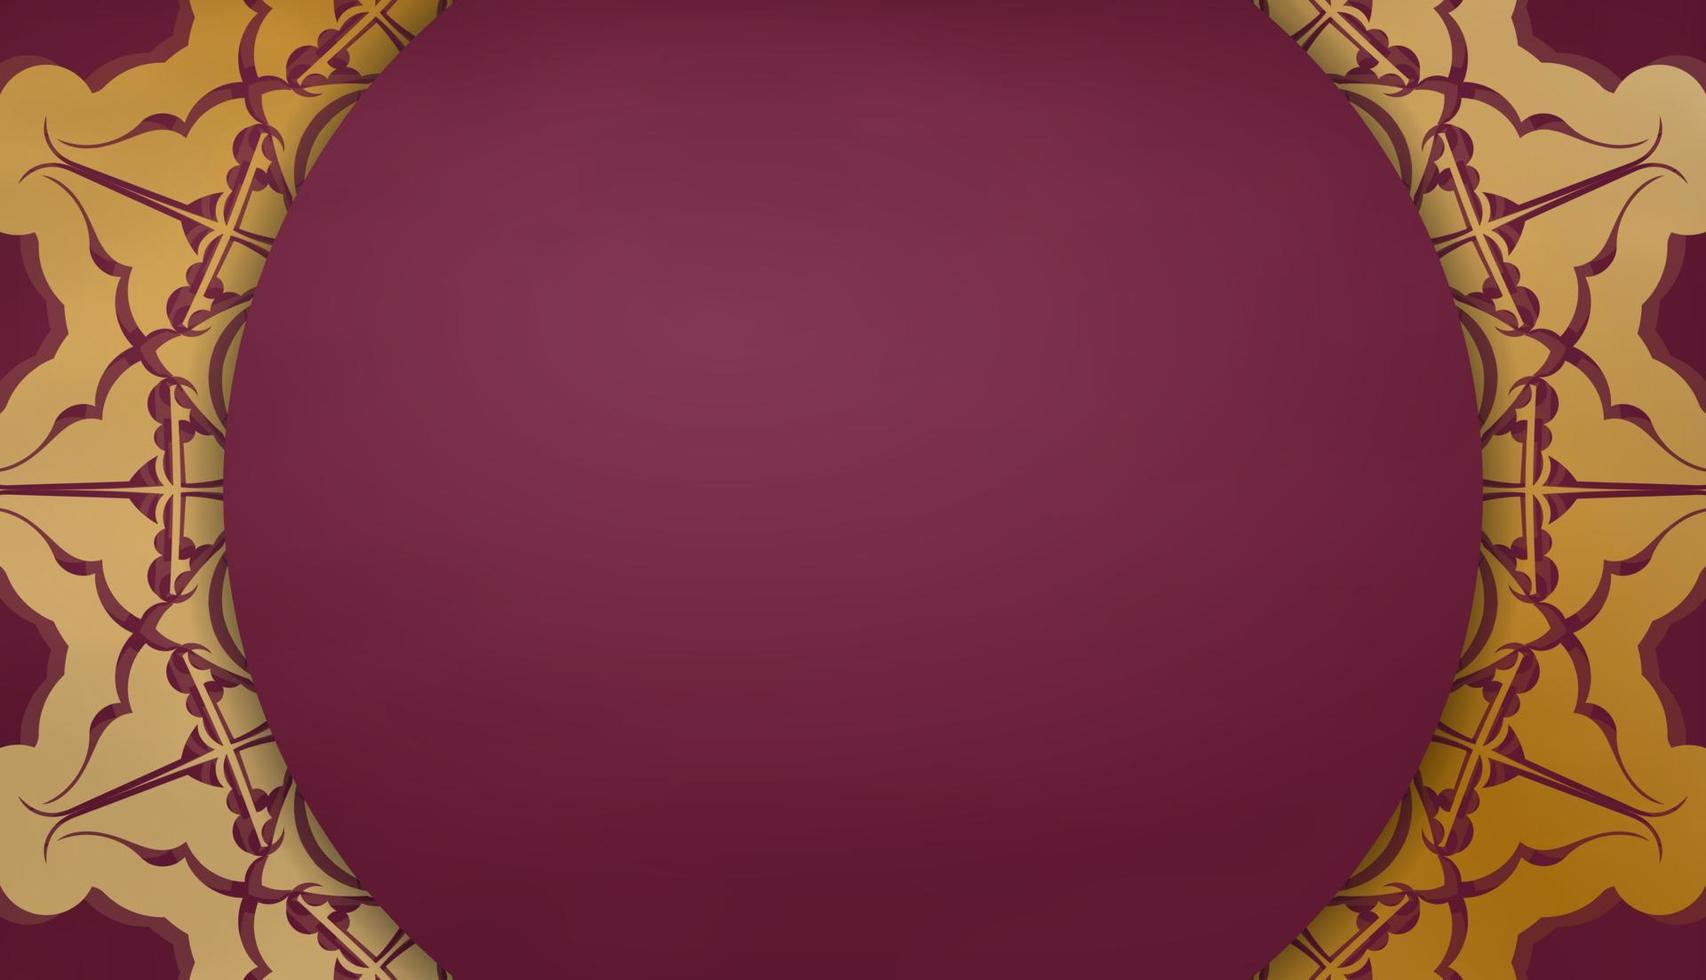 Burgundy banner with Greek gold pattern and space for logo or text vector